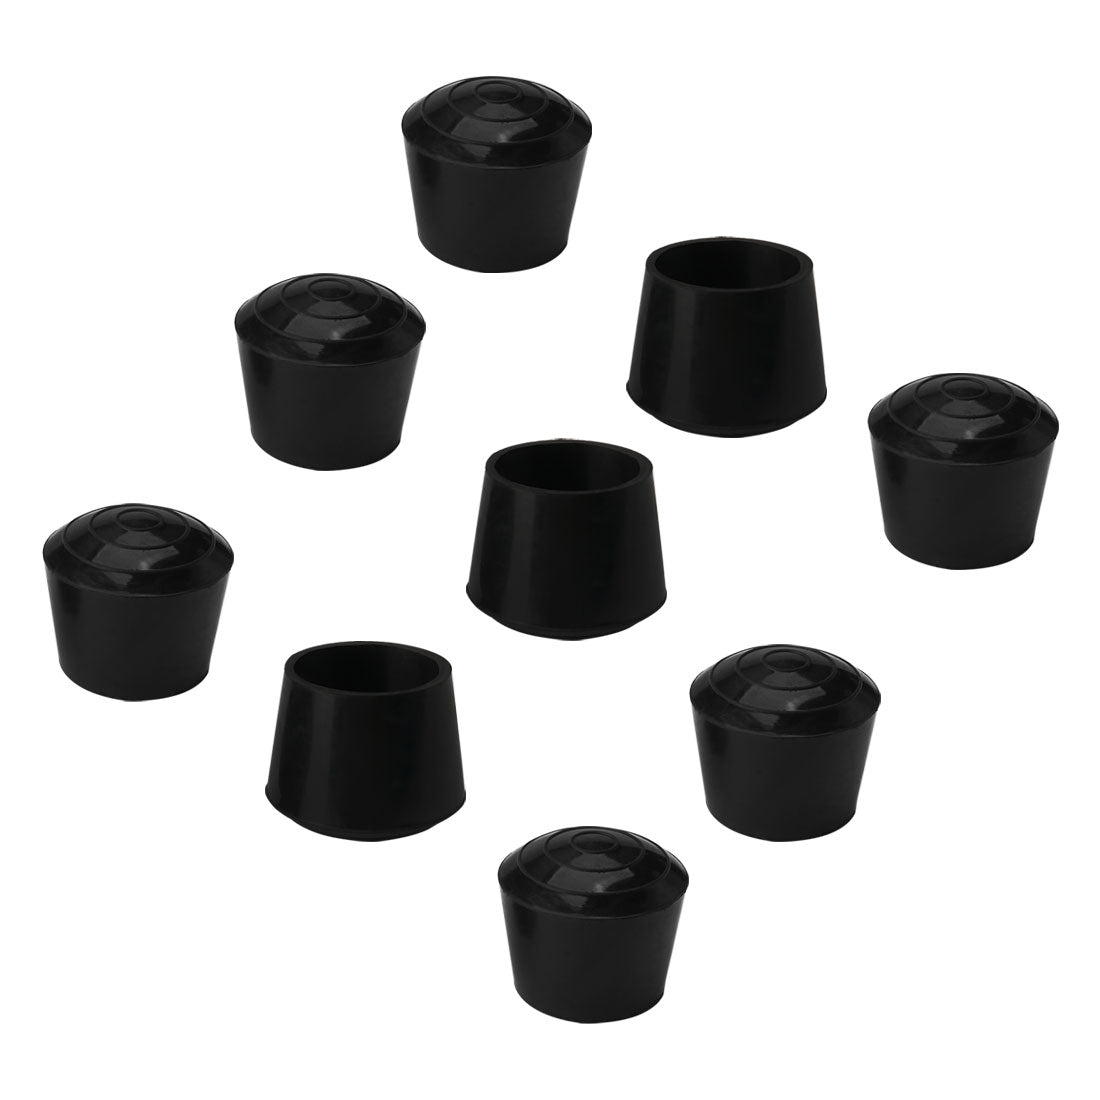 uxcell Uxcell Rubber Leg Cap Tip Cup Feet Cover 25mm 1" Inner Dia 9pcs for Furniture Table